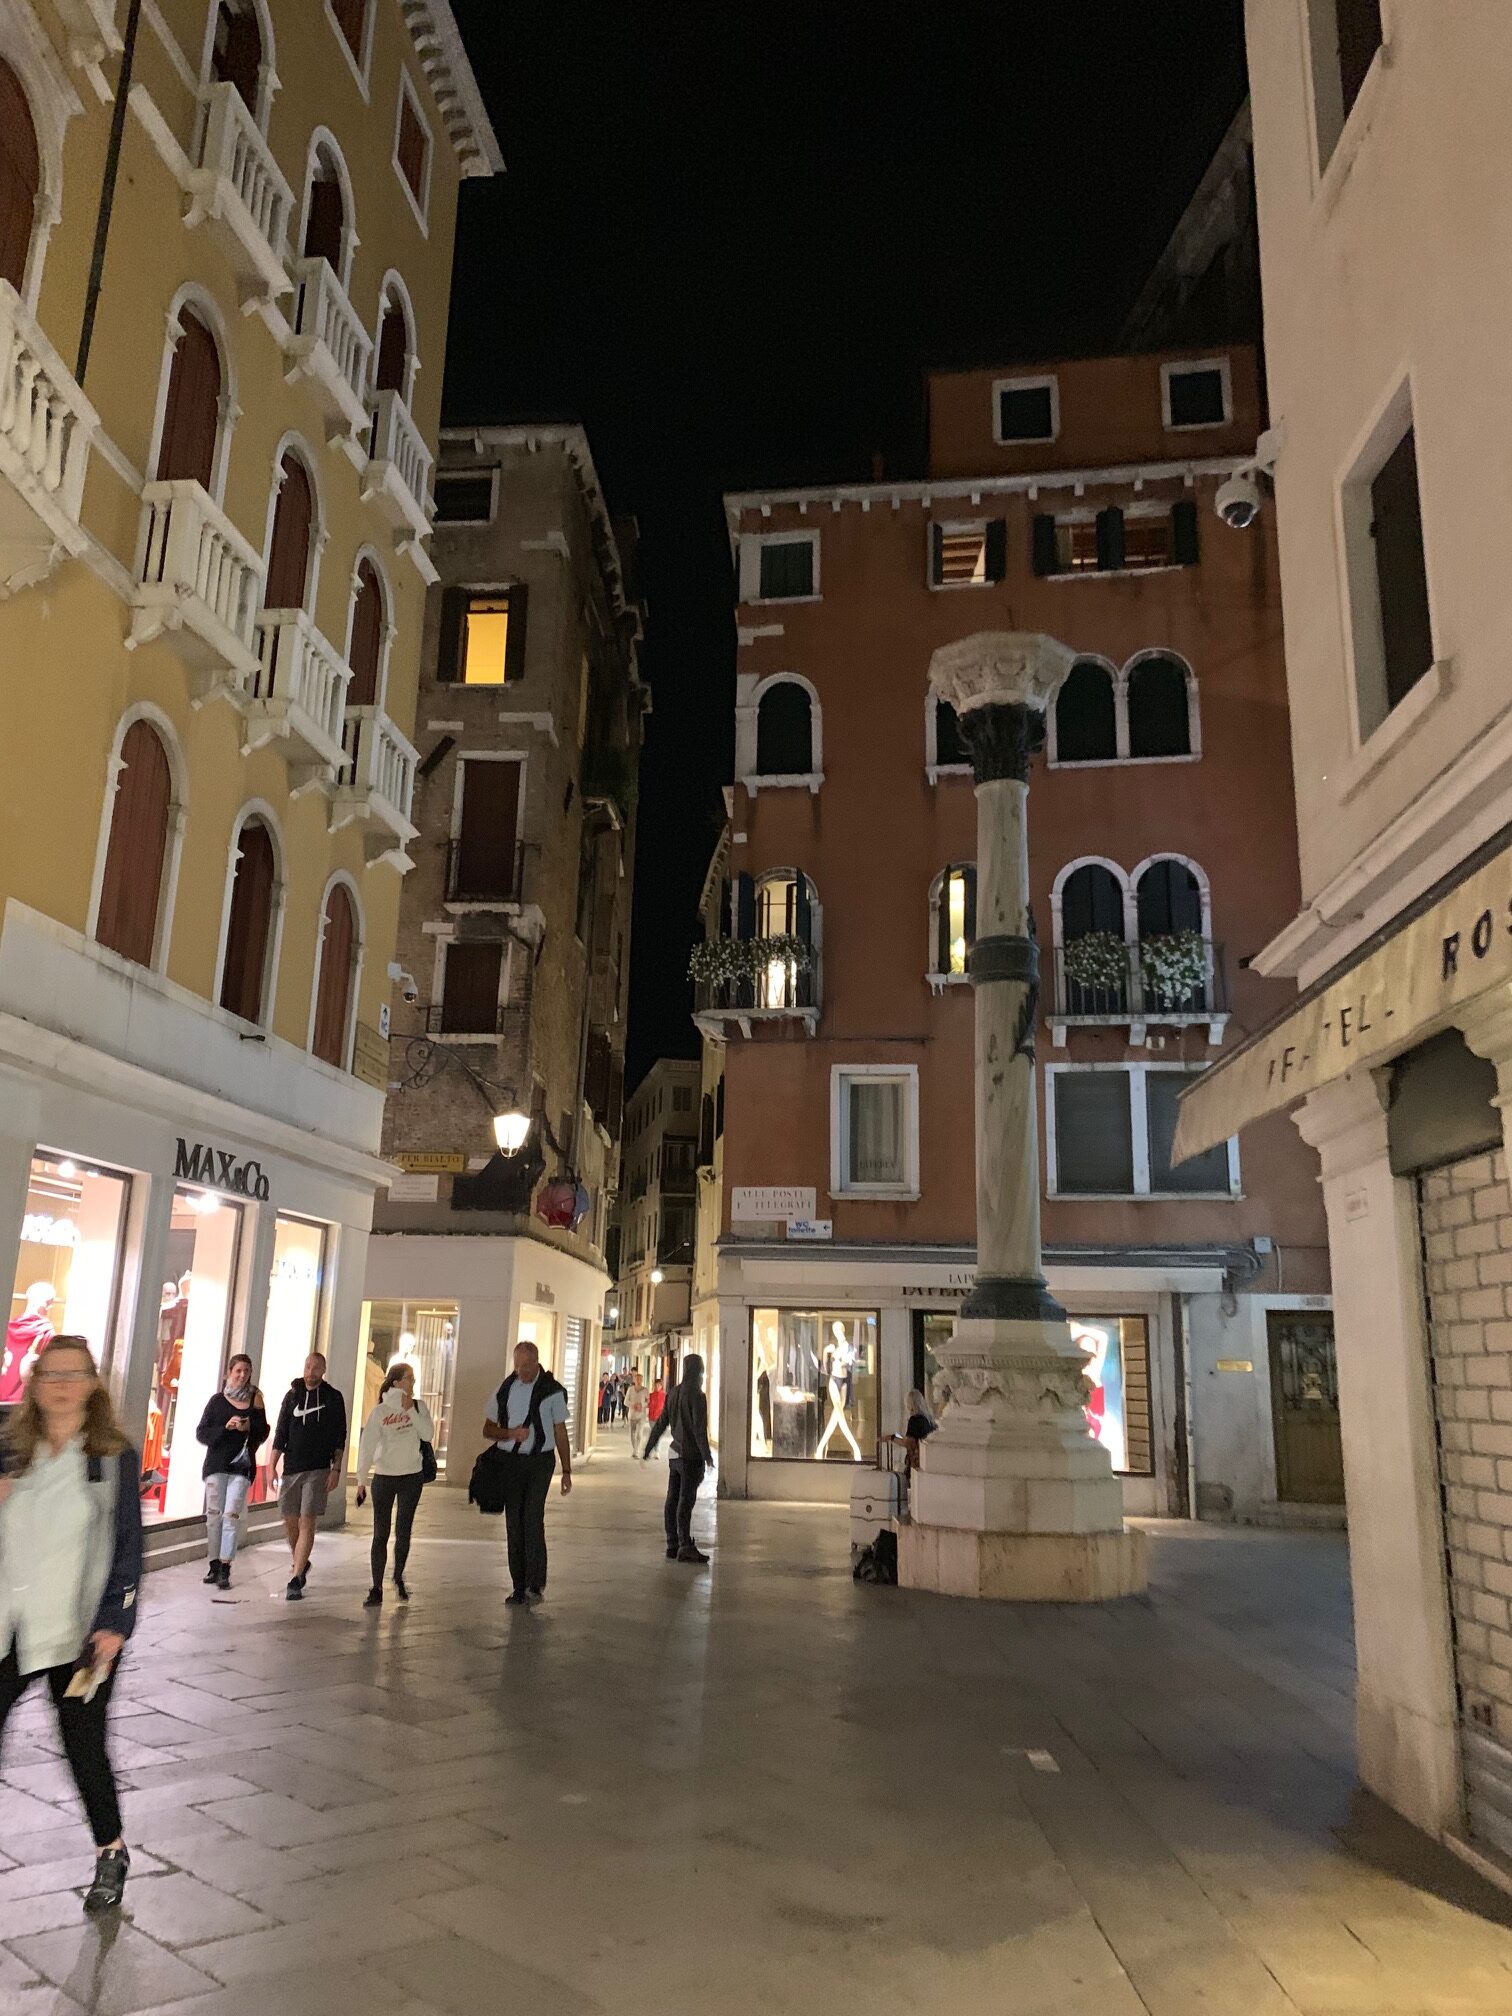 explore Venice at night for fewer crowds as see in this town square